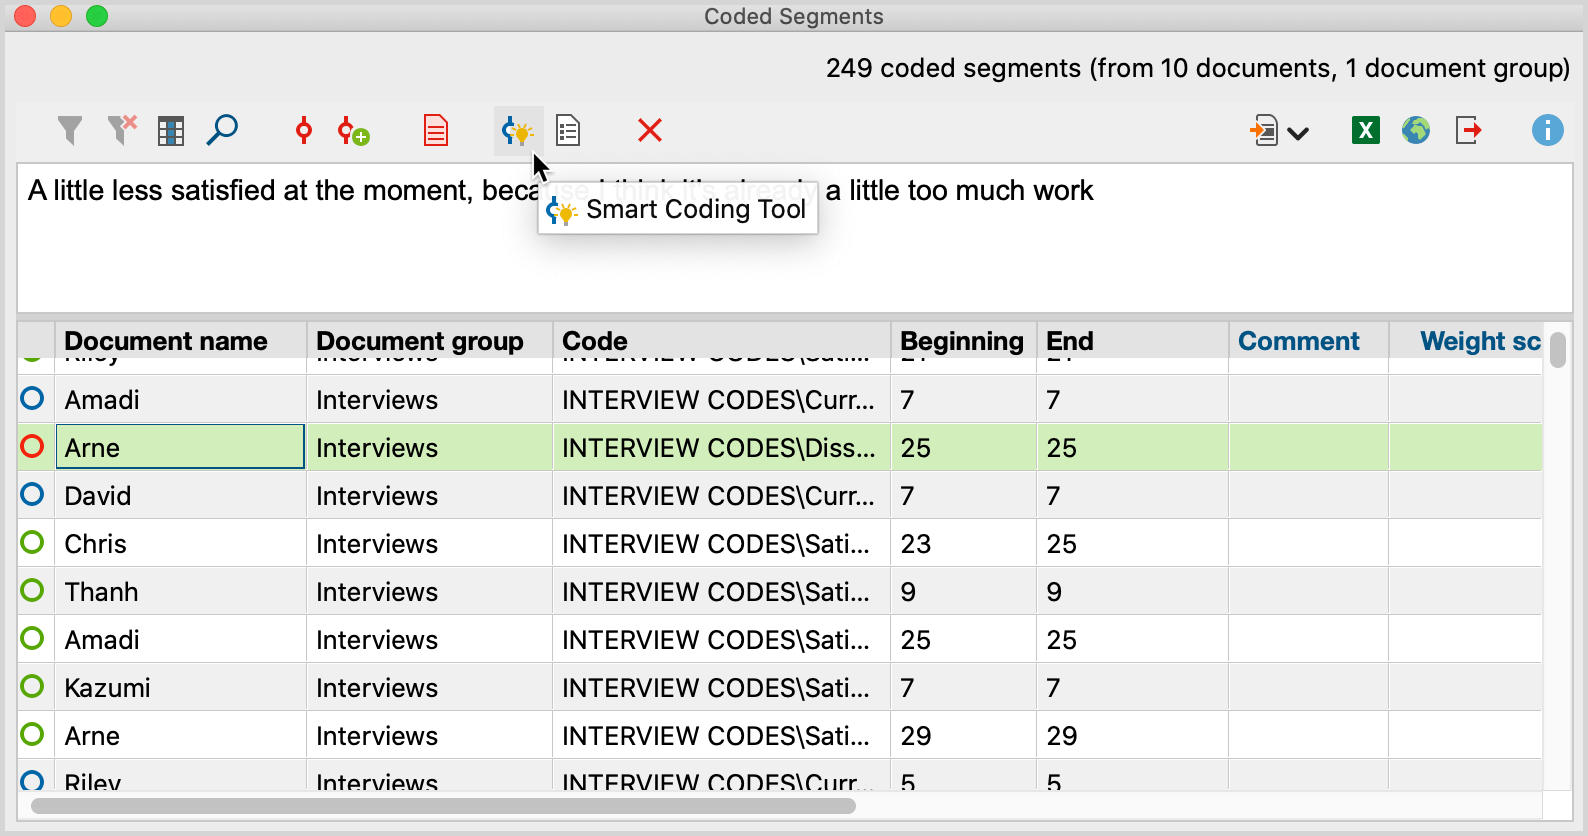 Opening the Smart Coding Tool from the “Overview of Coded Segments“